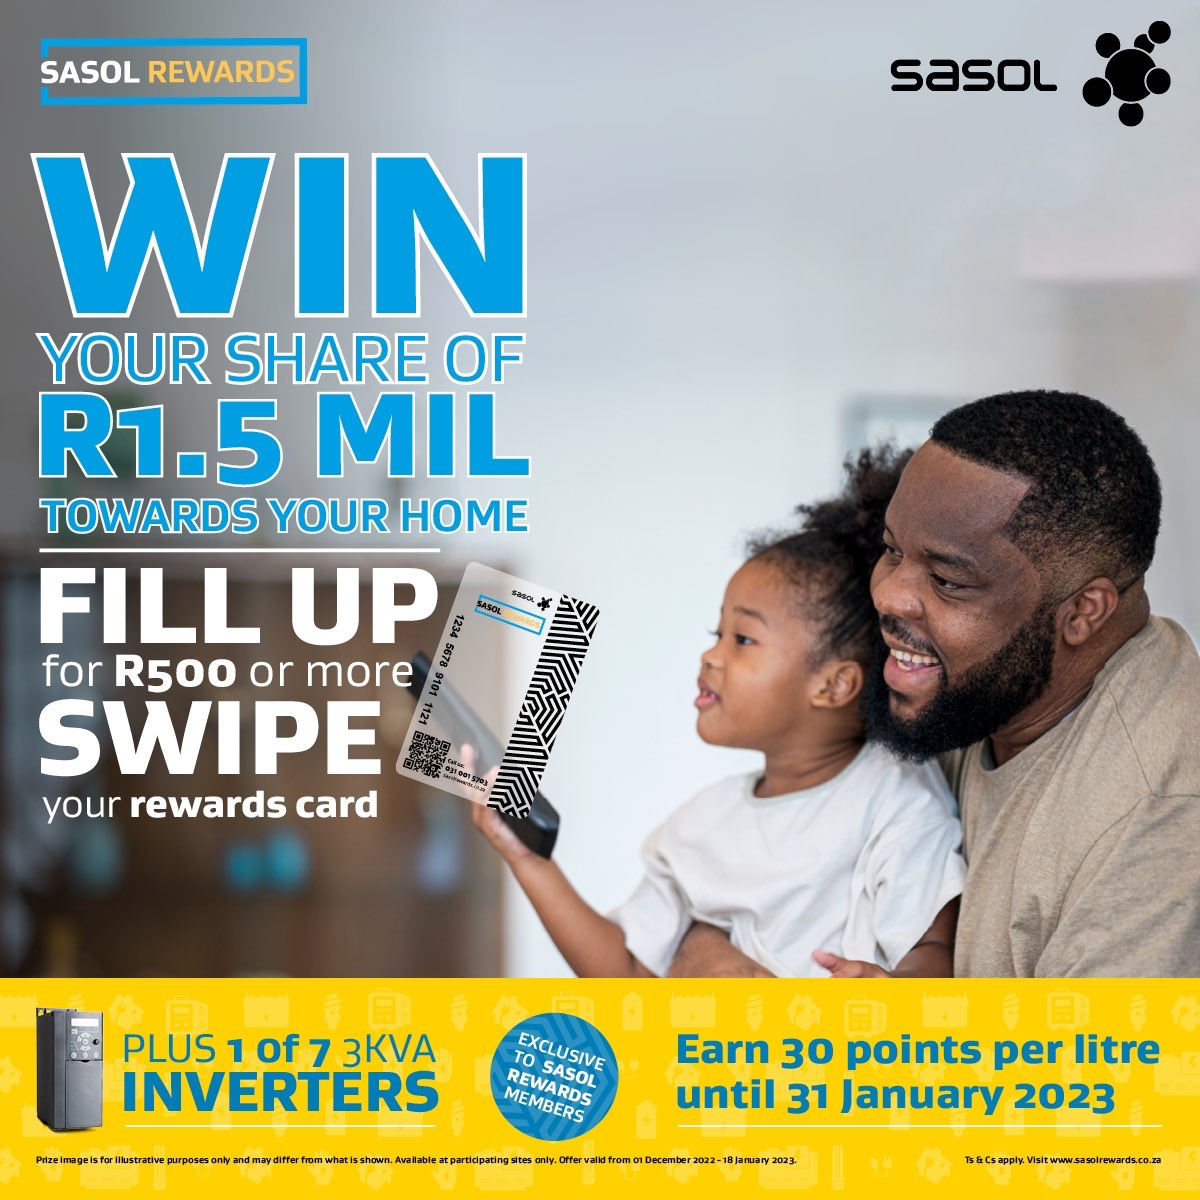 competition time ❗️❗️❗️

looks like load shedding is something that isn’t going to leave us anytime soon but @SasolSA said “worry not🤌🏽”. 
just swipe your card with R500 or more & you could be the lucky winner to an inverter 🤭🔥
#SasolRewards 

bit.ly/3hOrj2f